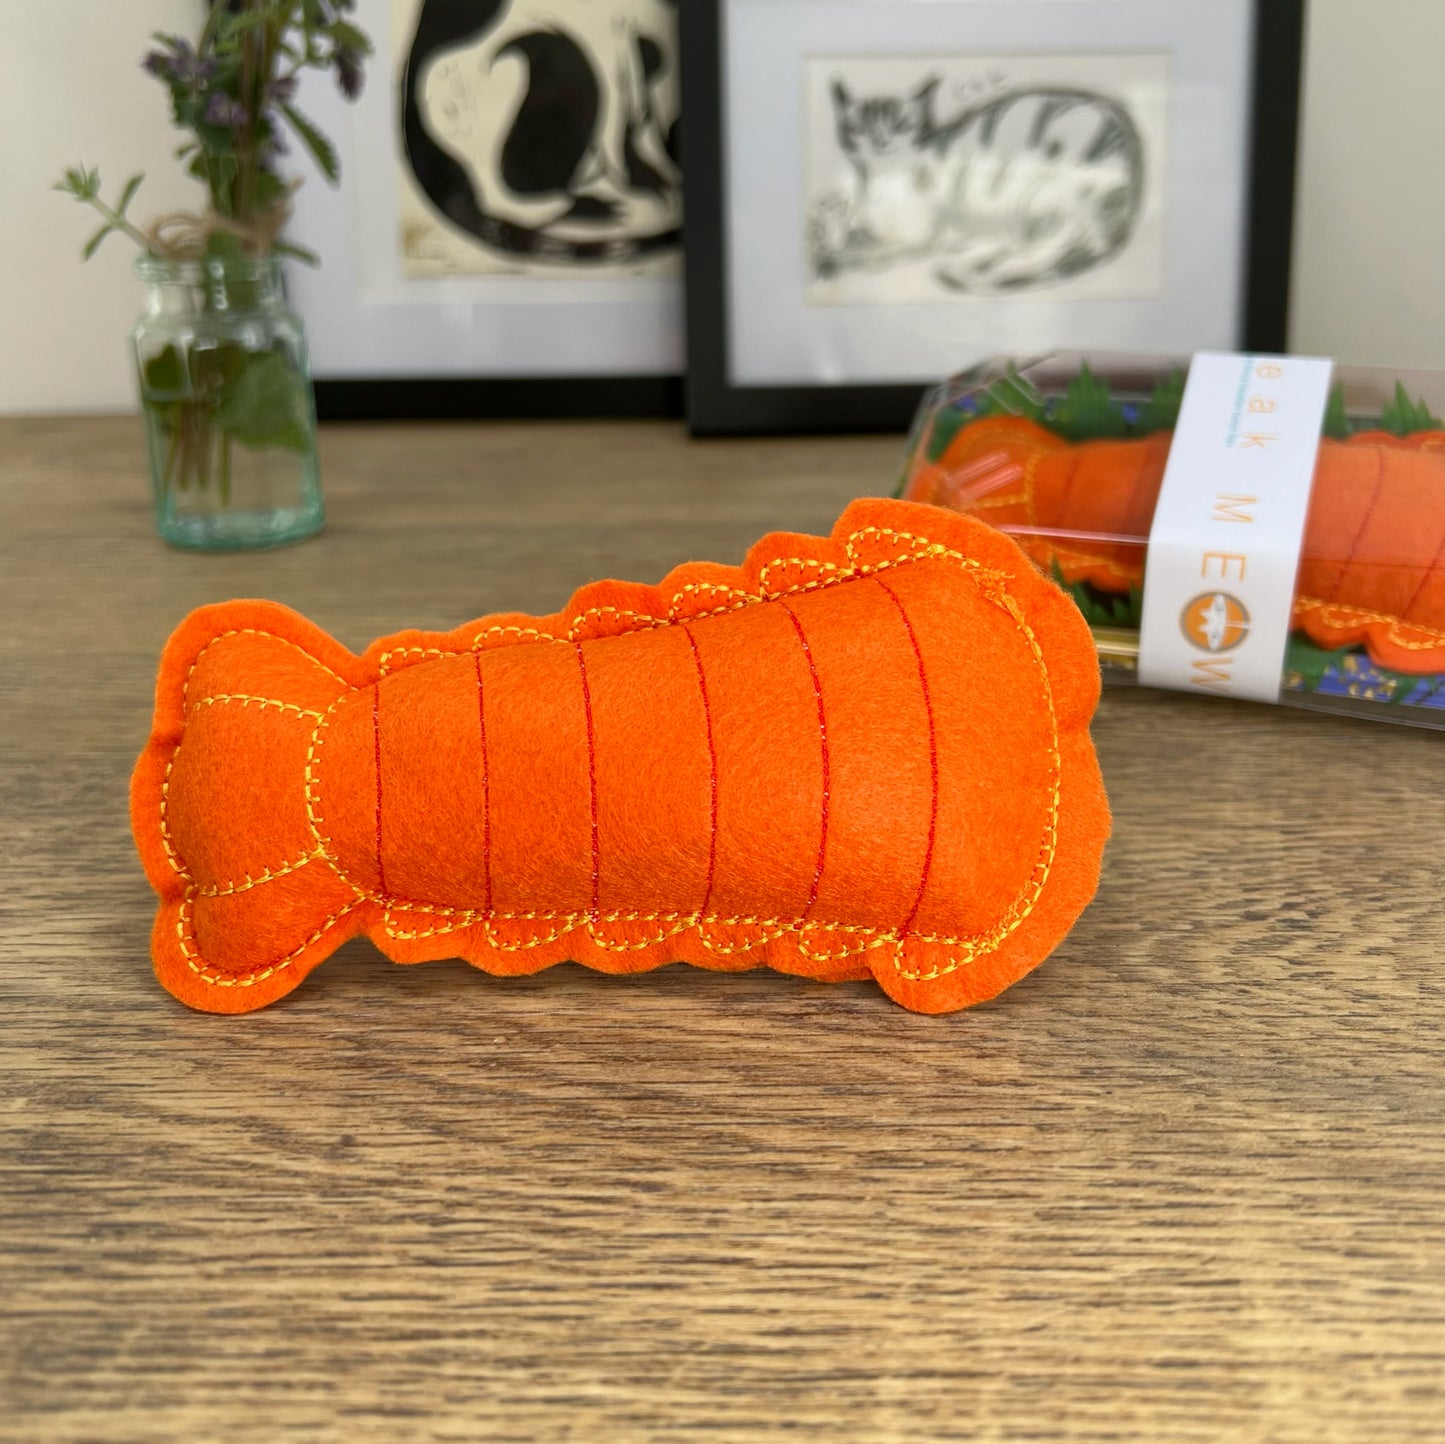 Freak Meowt Luxury Cat Toys, Gifts for Cats Valerian Root Lobster Tail